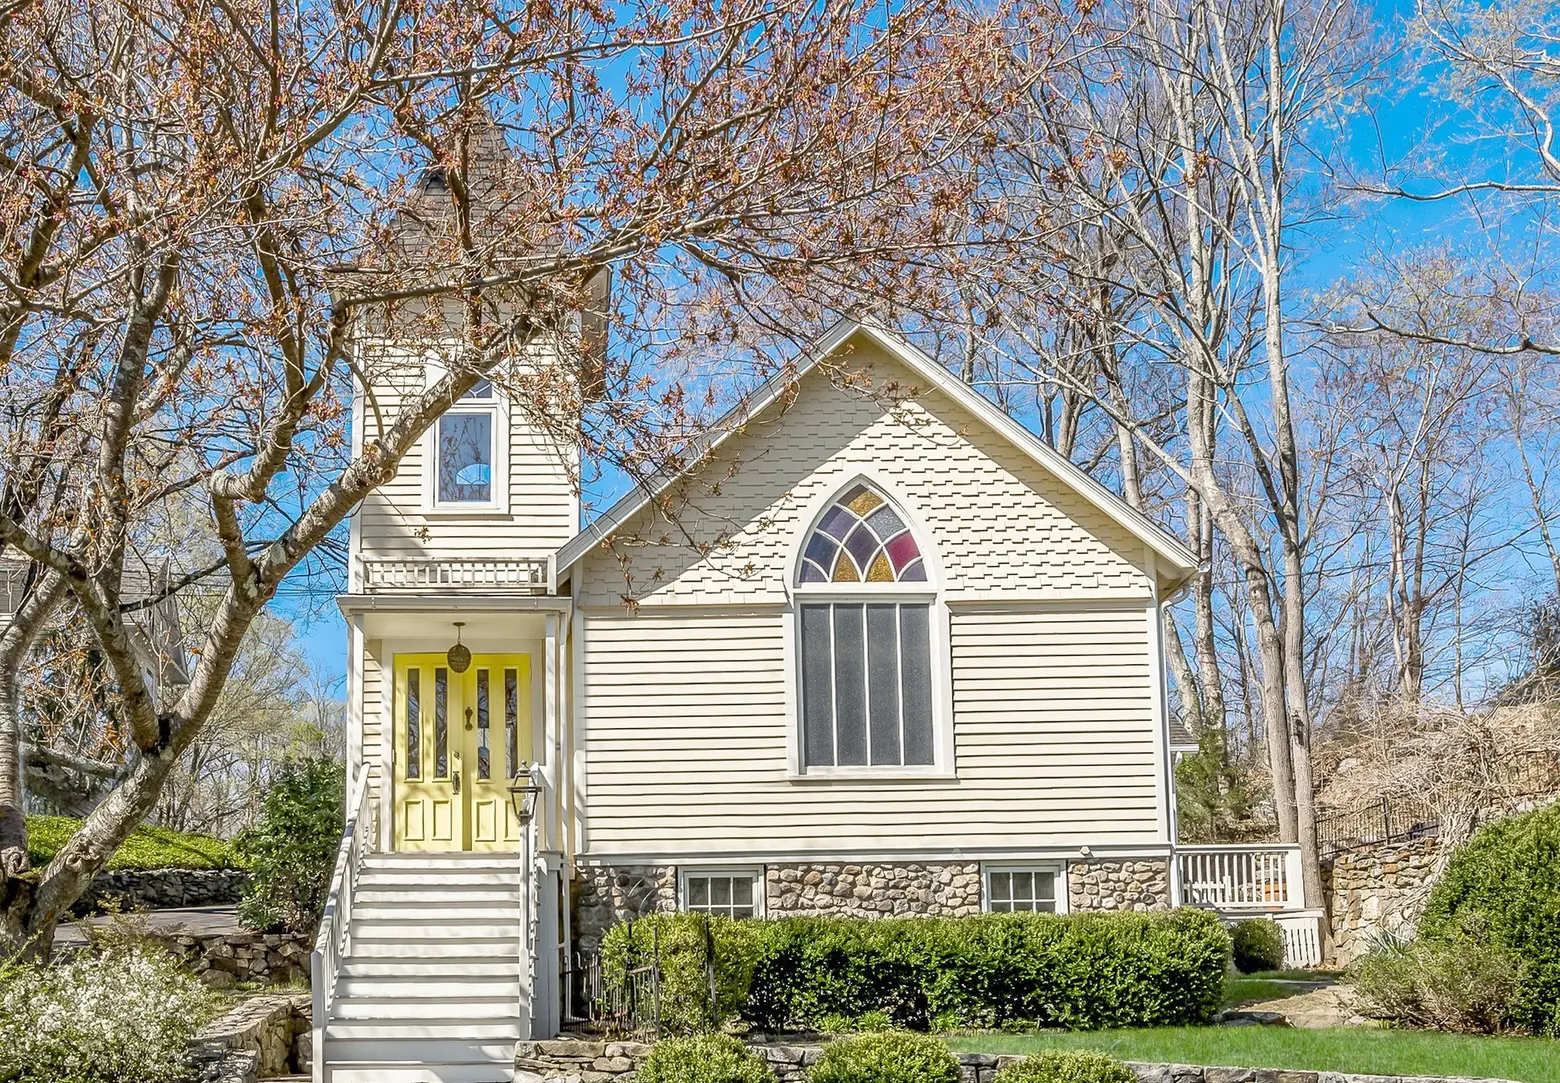 For just $865K, you can live in this beautiful converted church in Connecticut